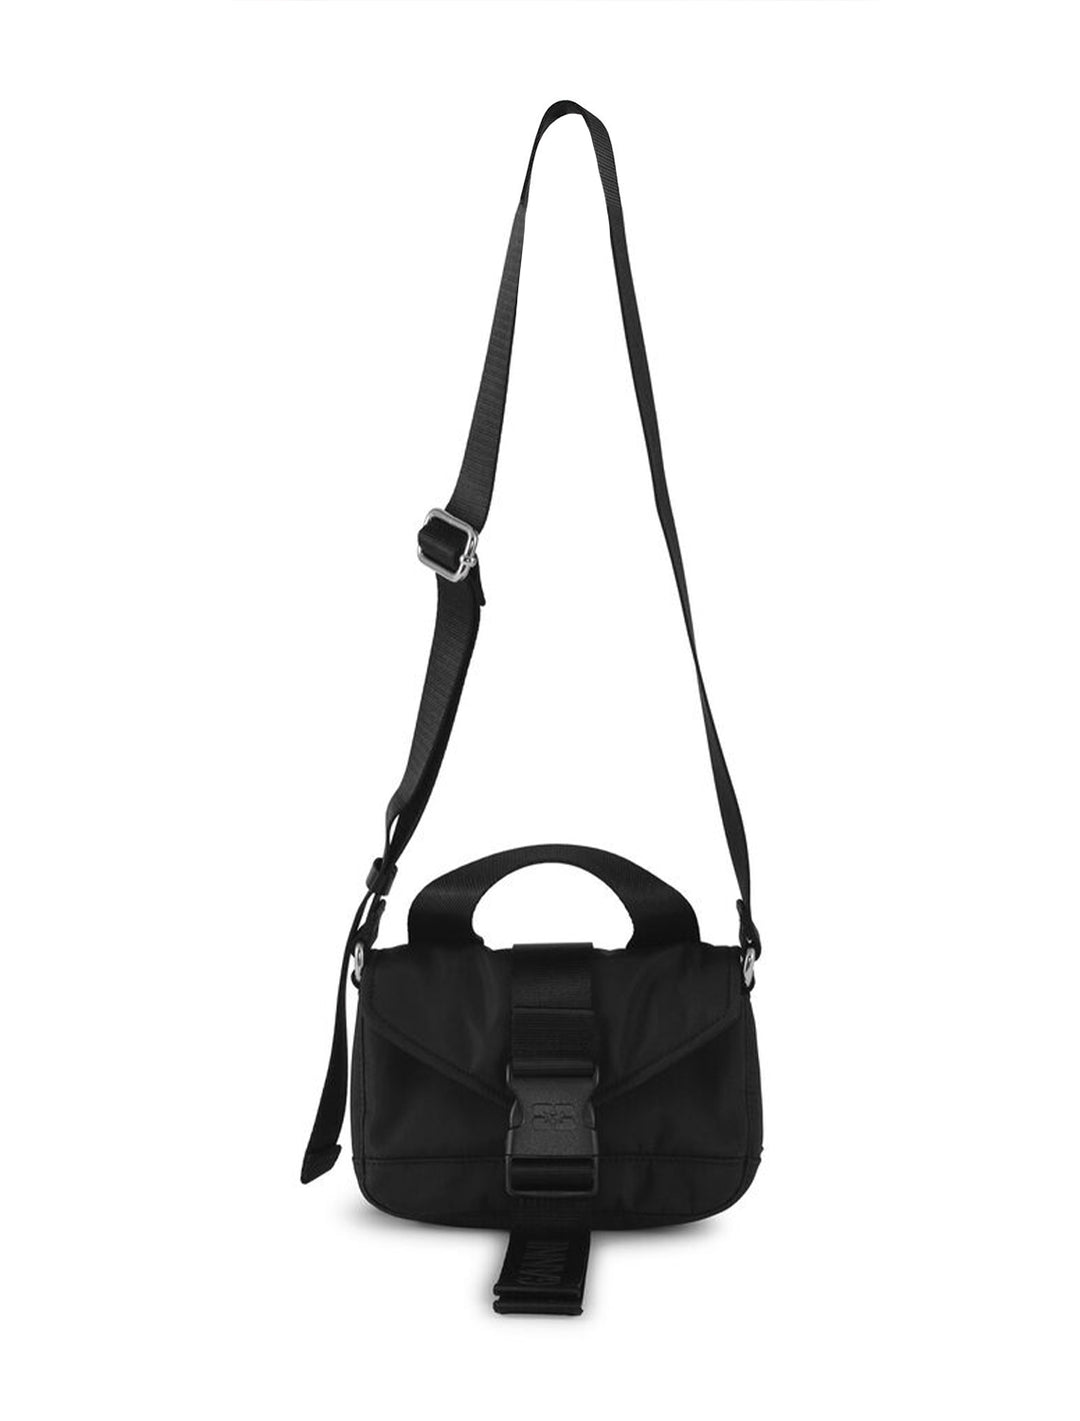 Front view of GANNI's recycled tech mini satchel in black.